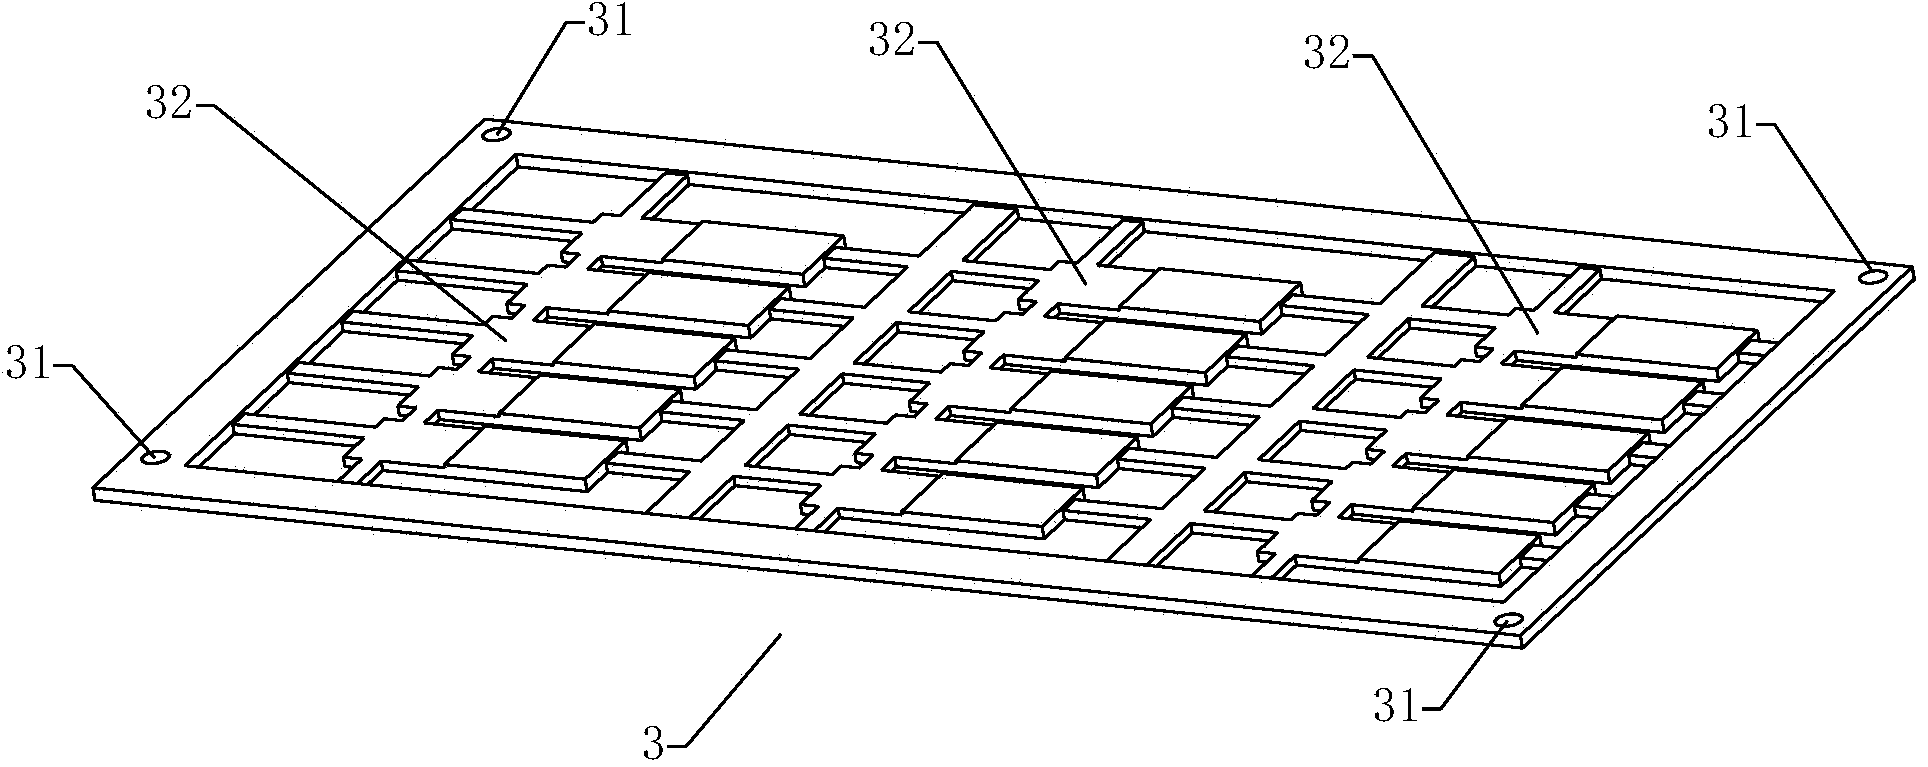 Jig and carrier plate used for attaching circuit board strength reinforcing pieces